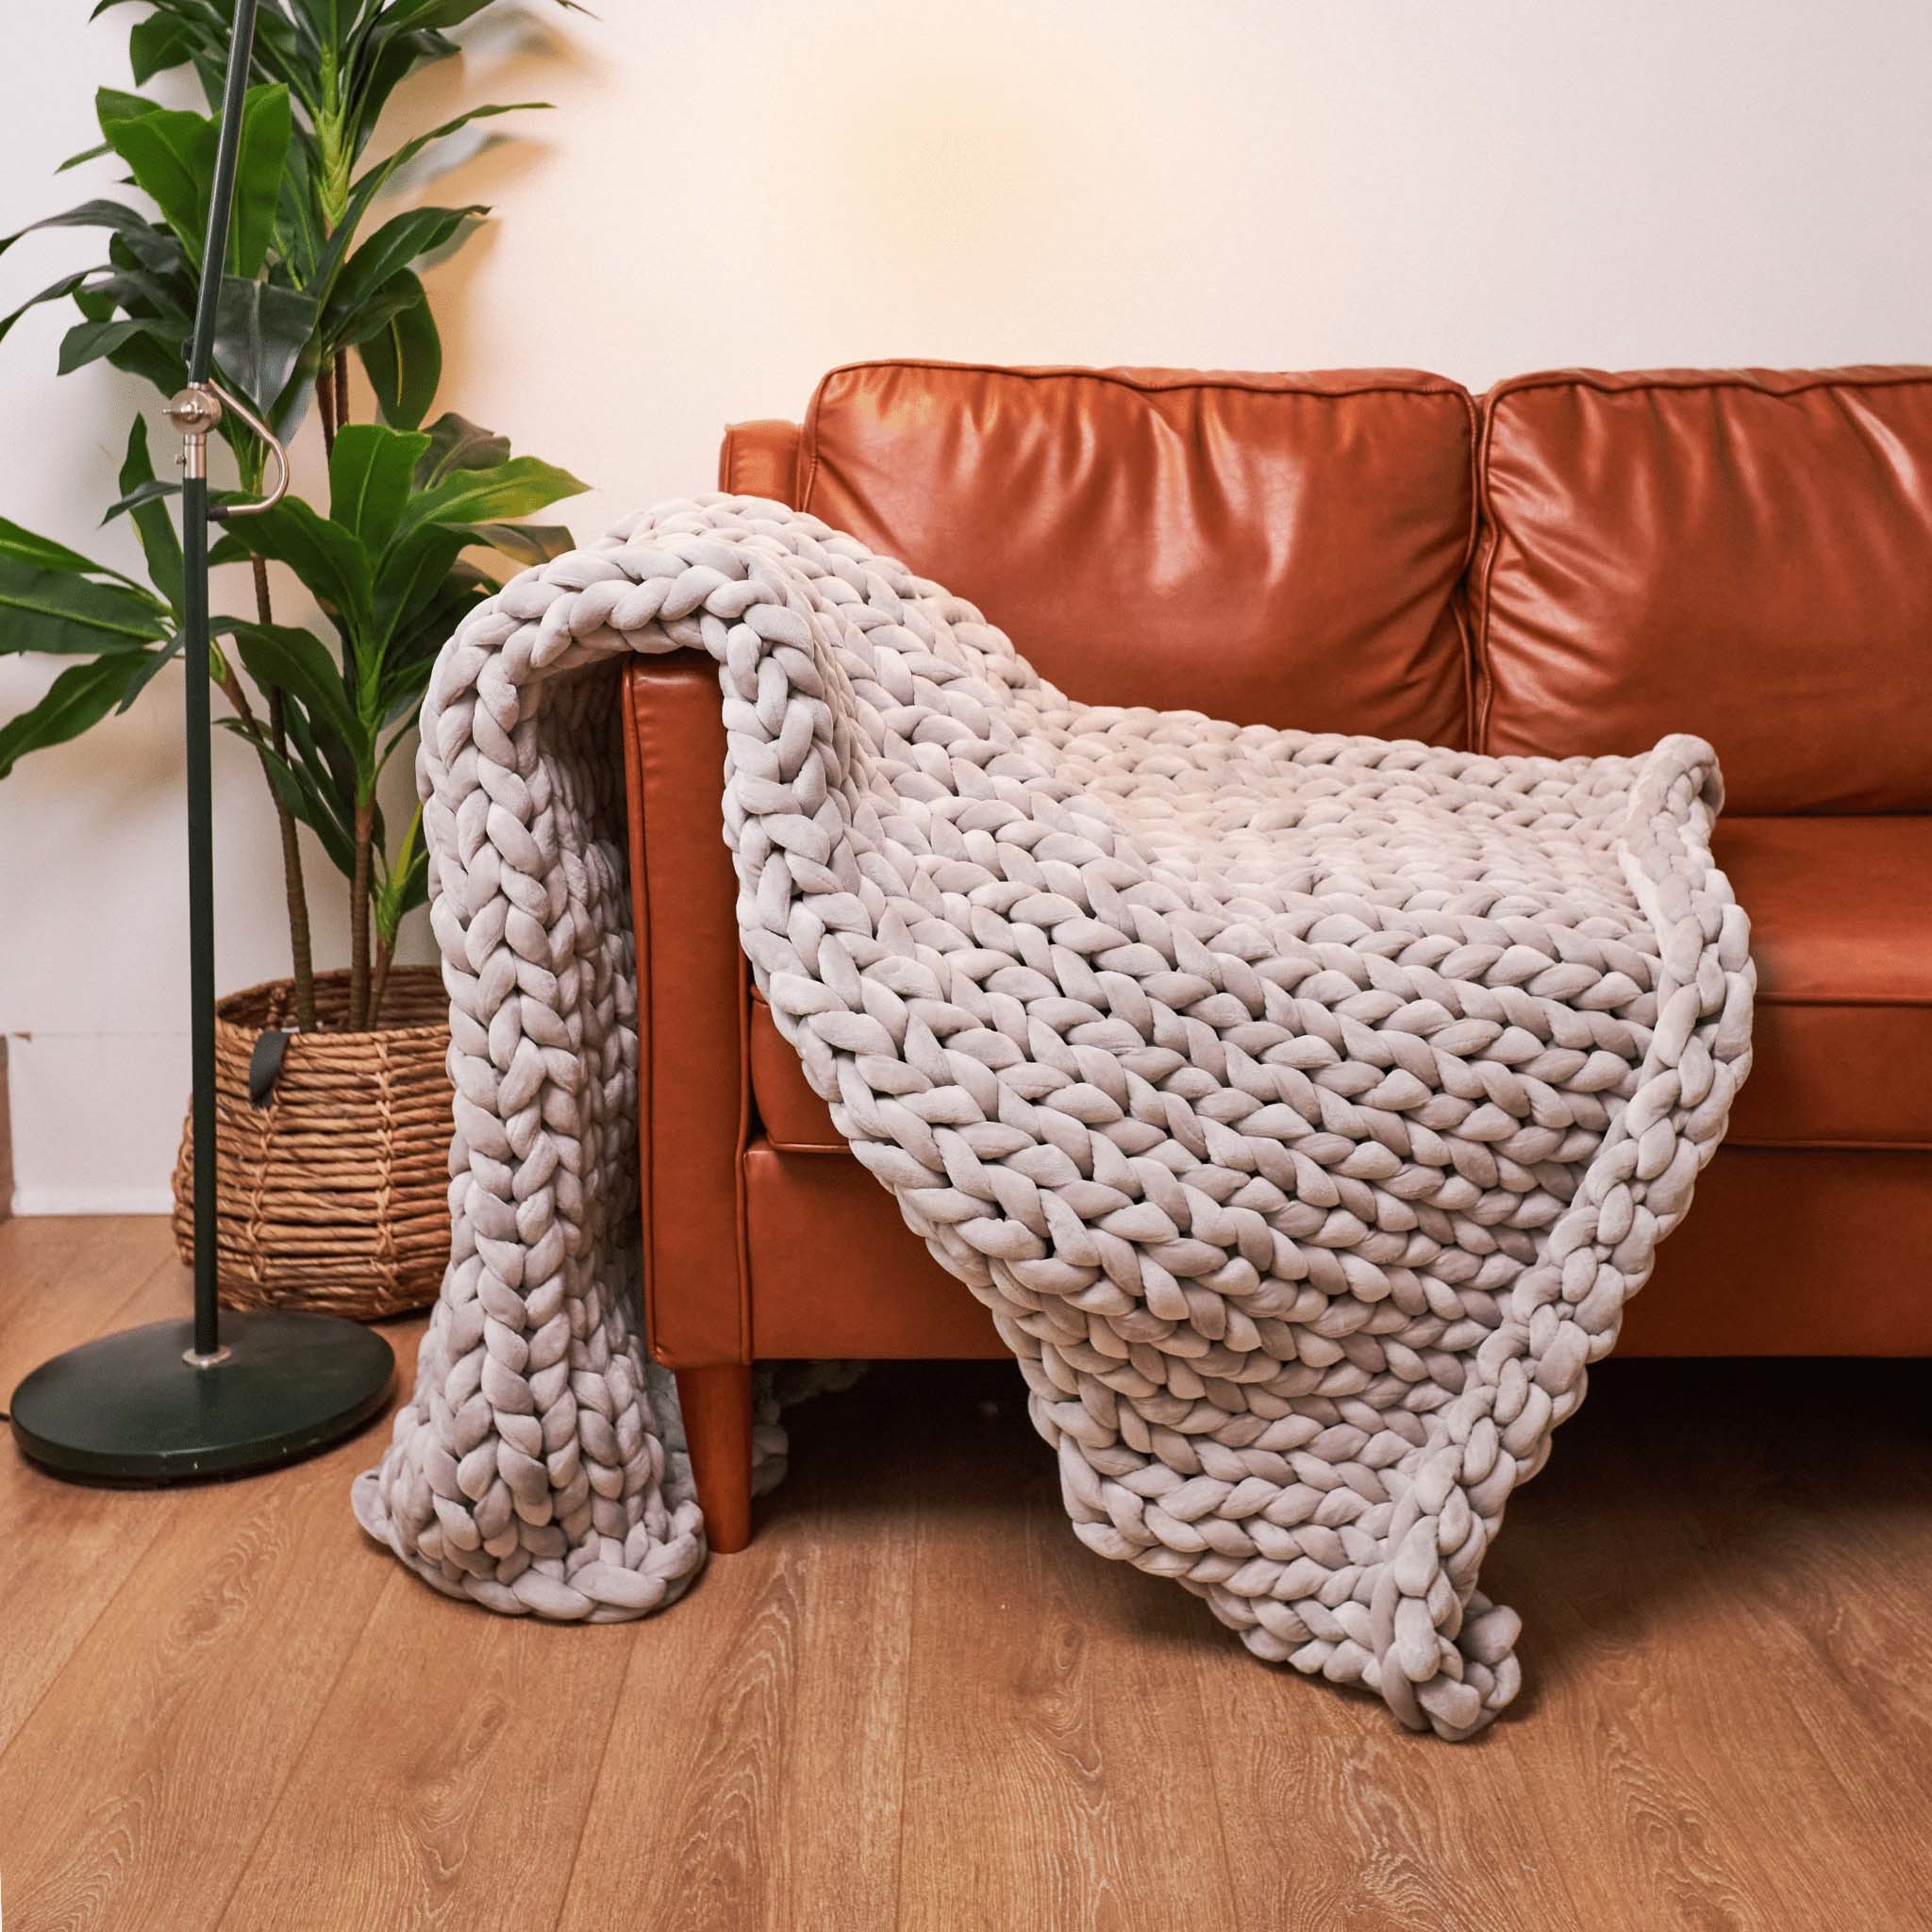 hush weighted blanket on sofa